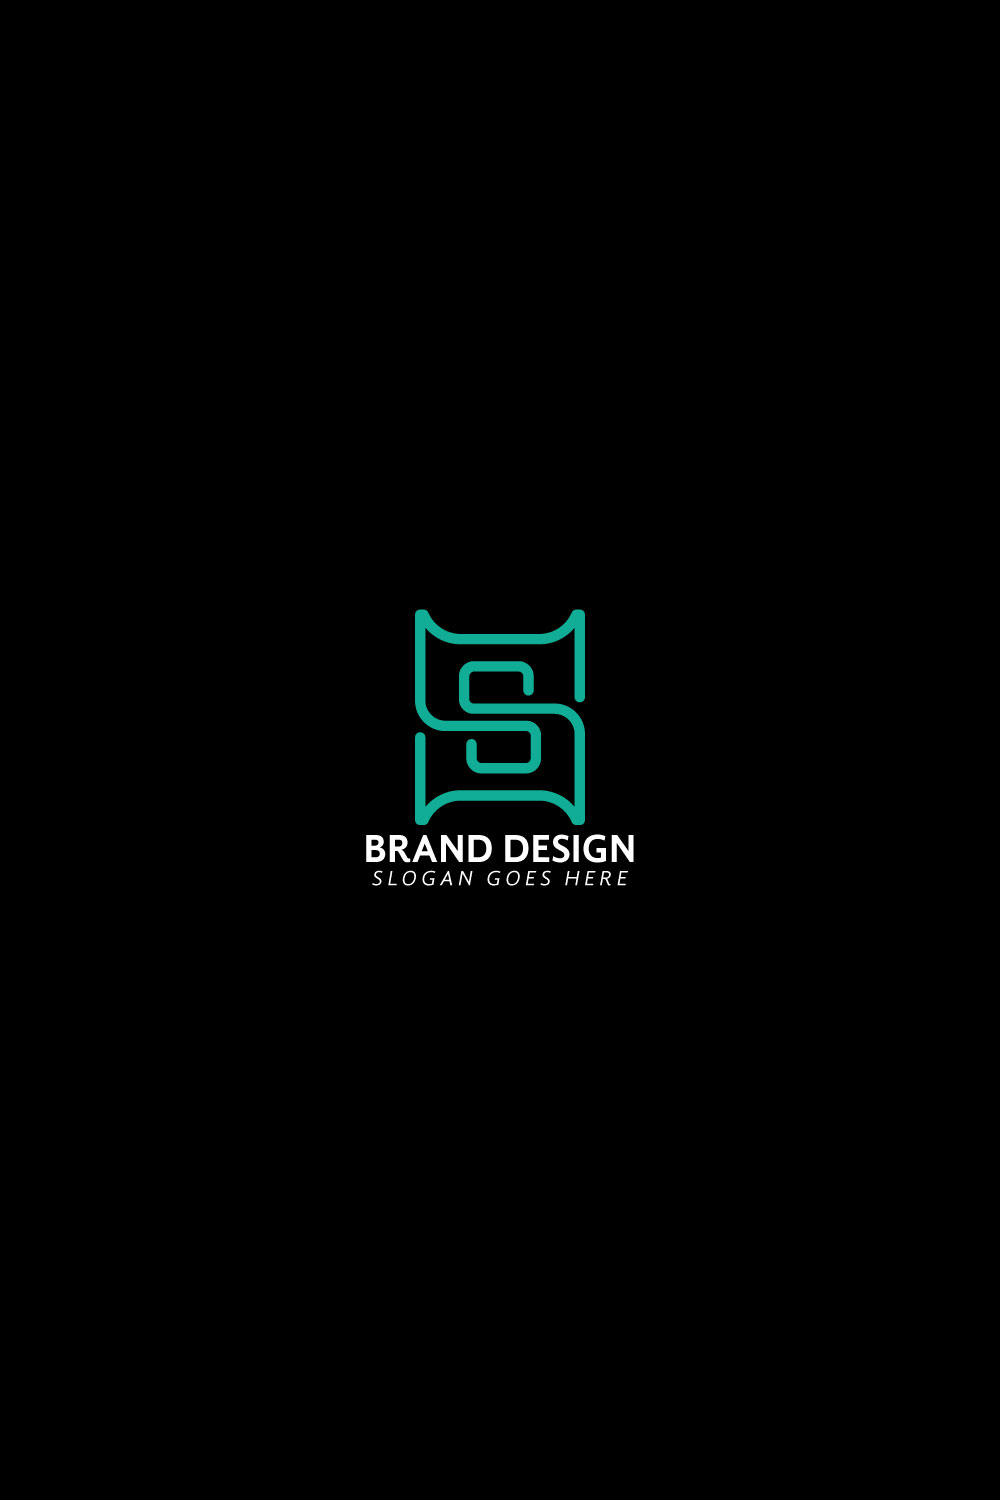 Letter SS logo design concept isolated on Black background pinterest preview image.